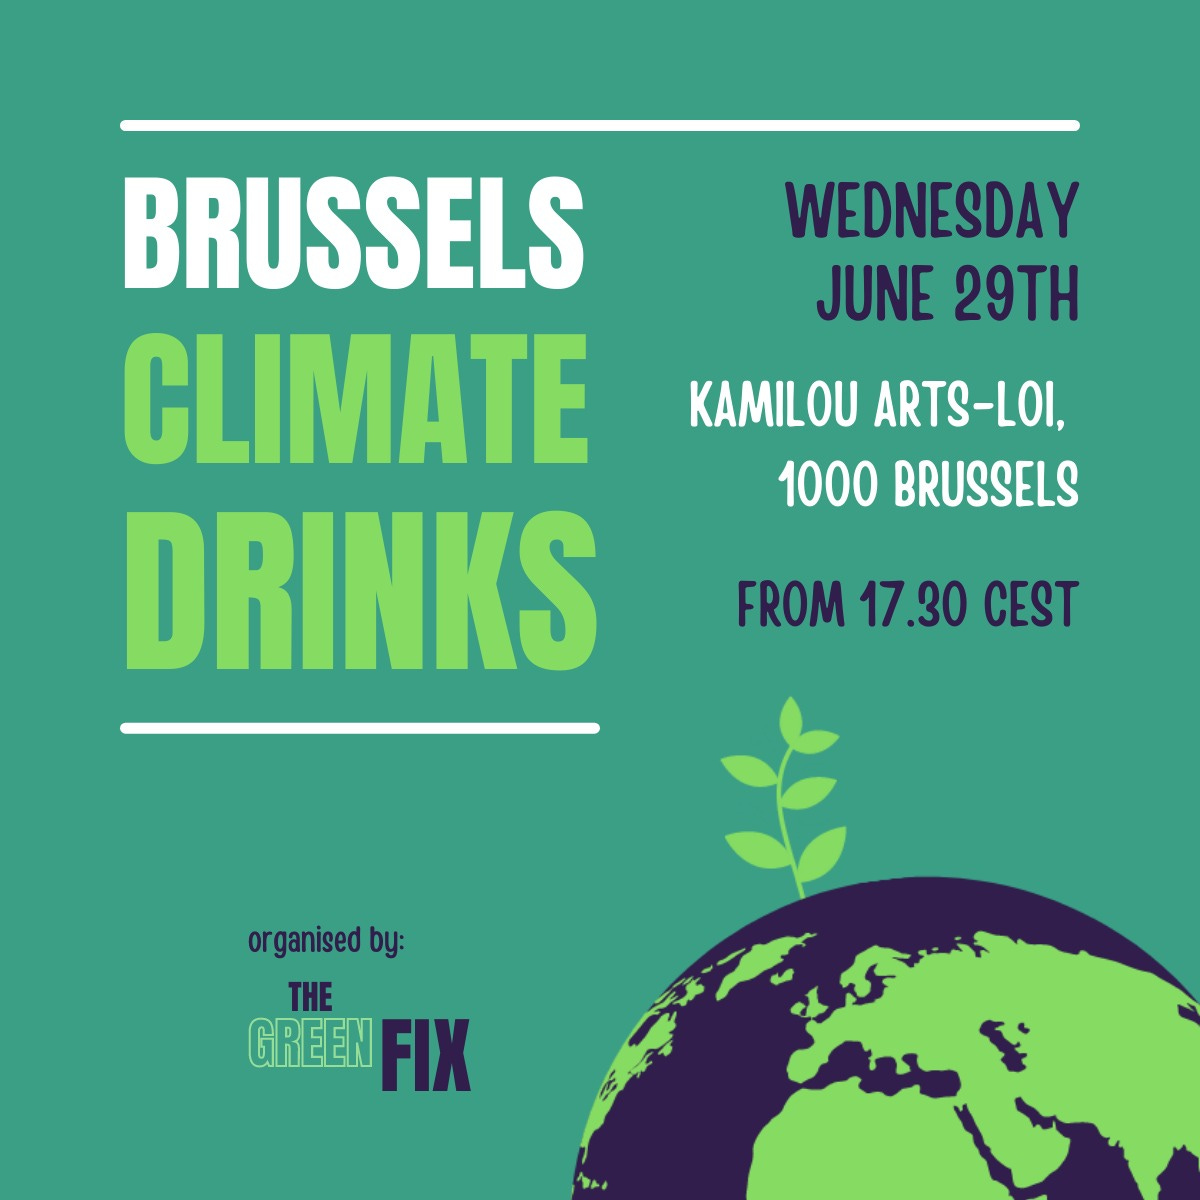 Graphic with title 'Brussels Climate Drinks' organised by The Green Fix. Kamilou in Arts-Loi, 1000 Brussels, from 17h30 CEST